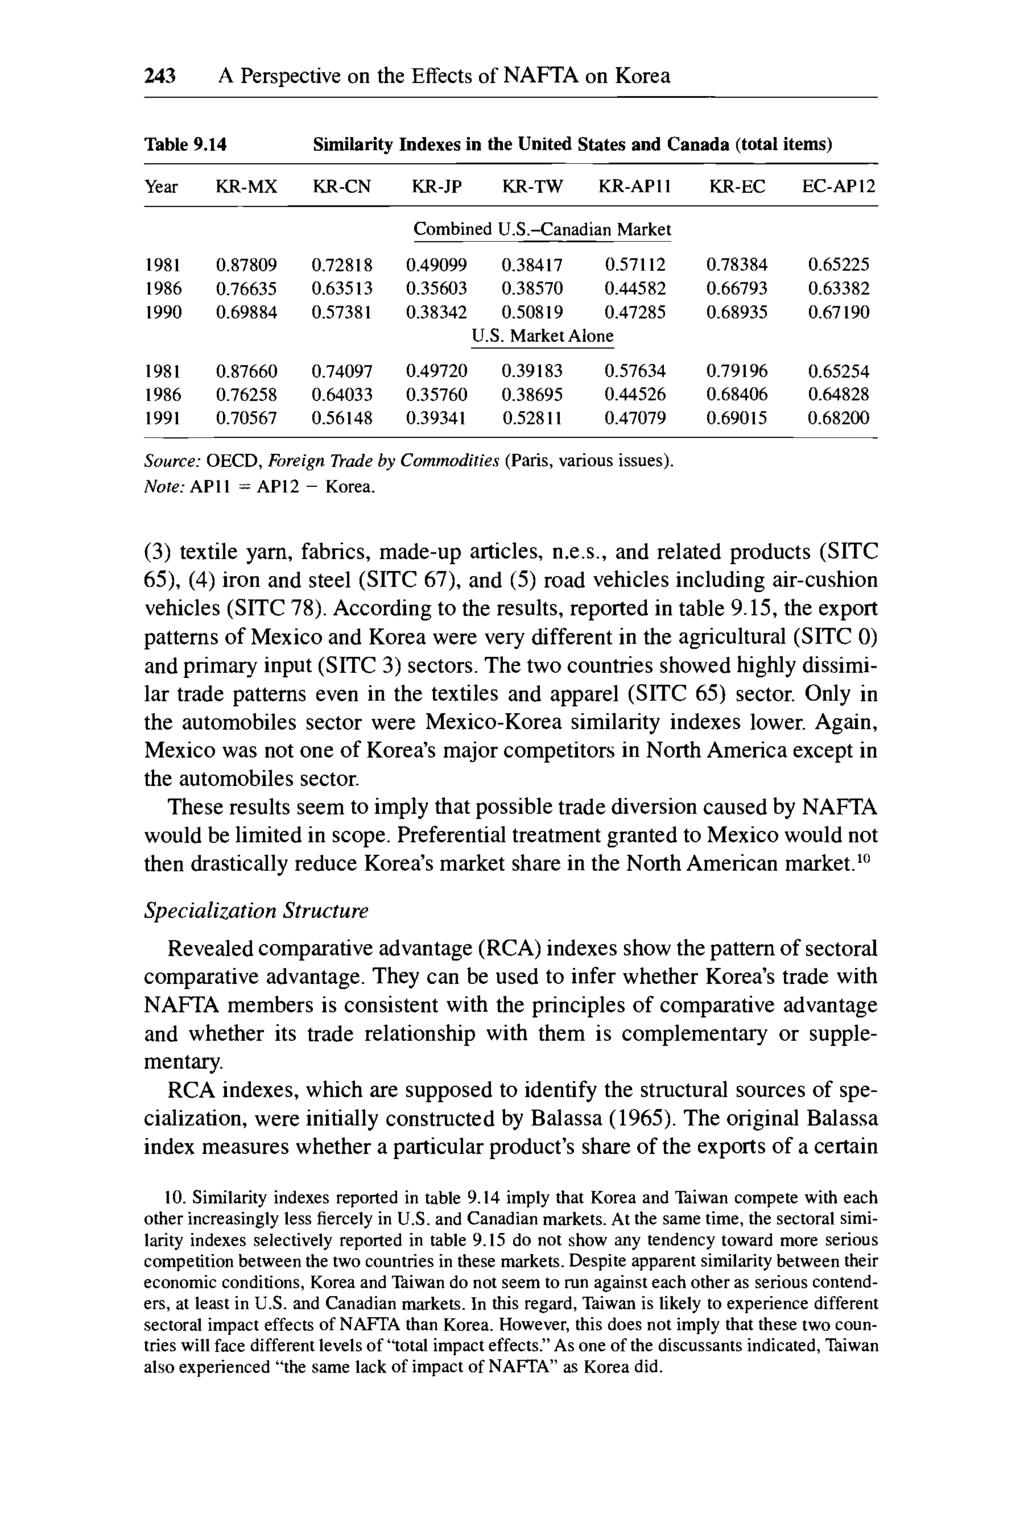 243 A Perspective on the Effects of NAFTA on Korea Table 9.14 Similarity Indexes in the United States and Canada (total items) Year KR-MX KR-CN KR-JP KR-TW KR-APl1 KR-EC EC-AP12 Combined U.S.-Canadian Market 19 0.